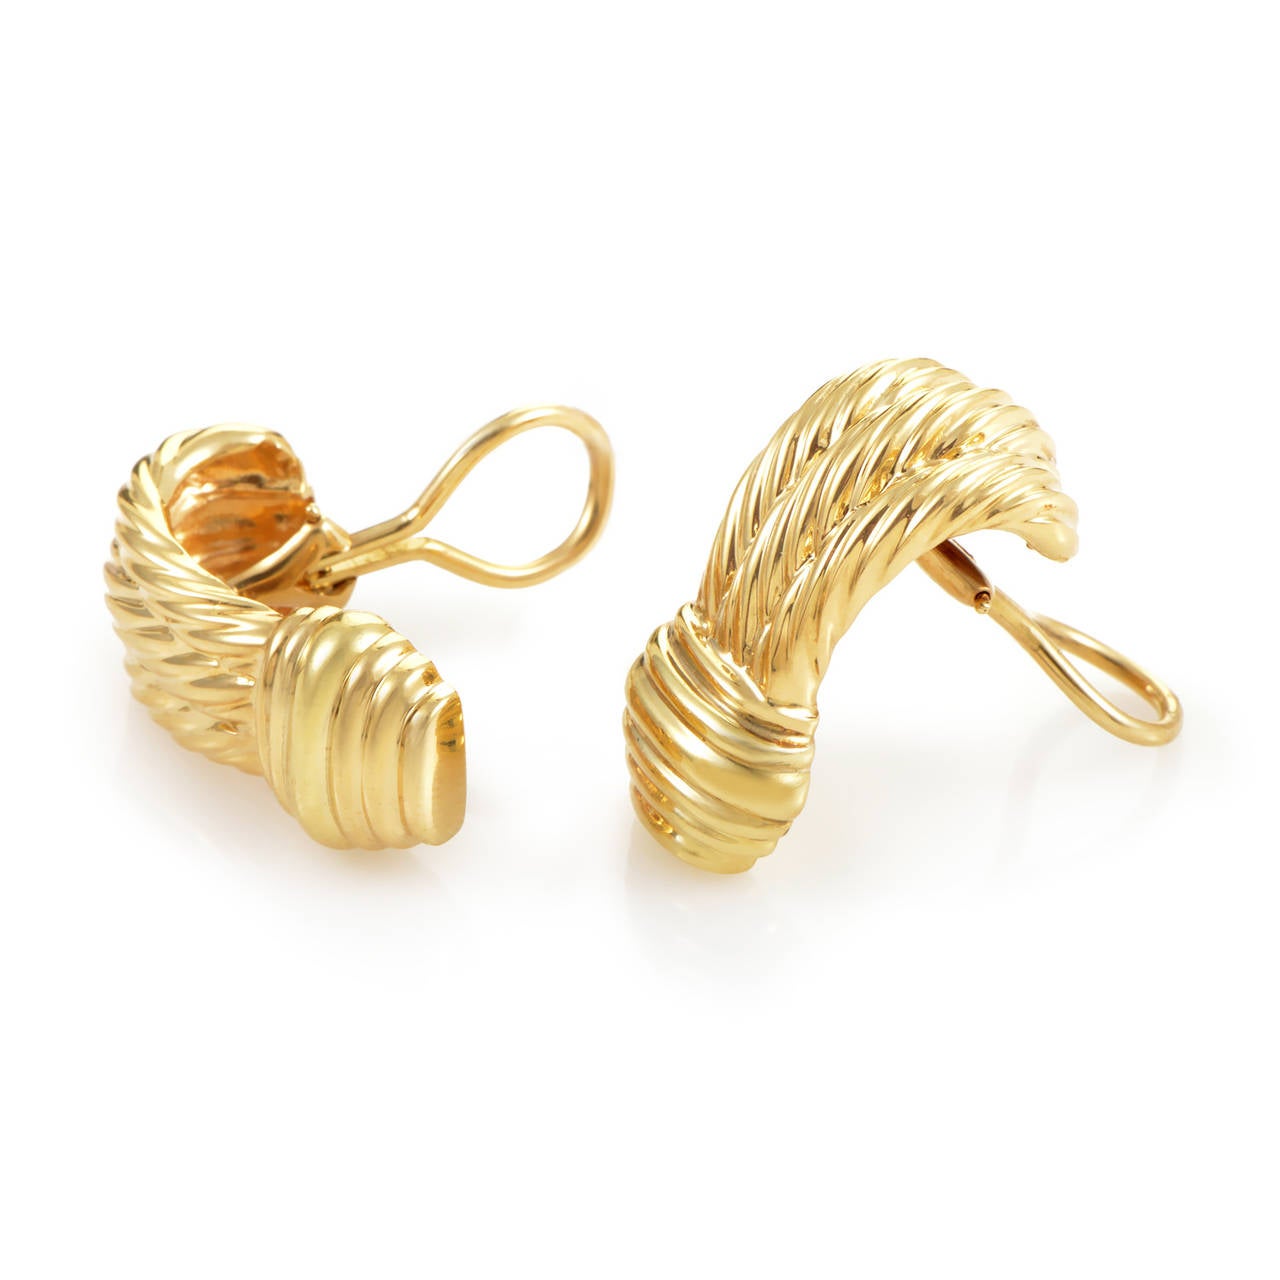 This pair of huggie earrings from David Yurman have a classic design which will remain en vogue for many years to come. The earrings are made entirely of 18K yellow gold and sport a lovely carved design.